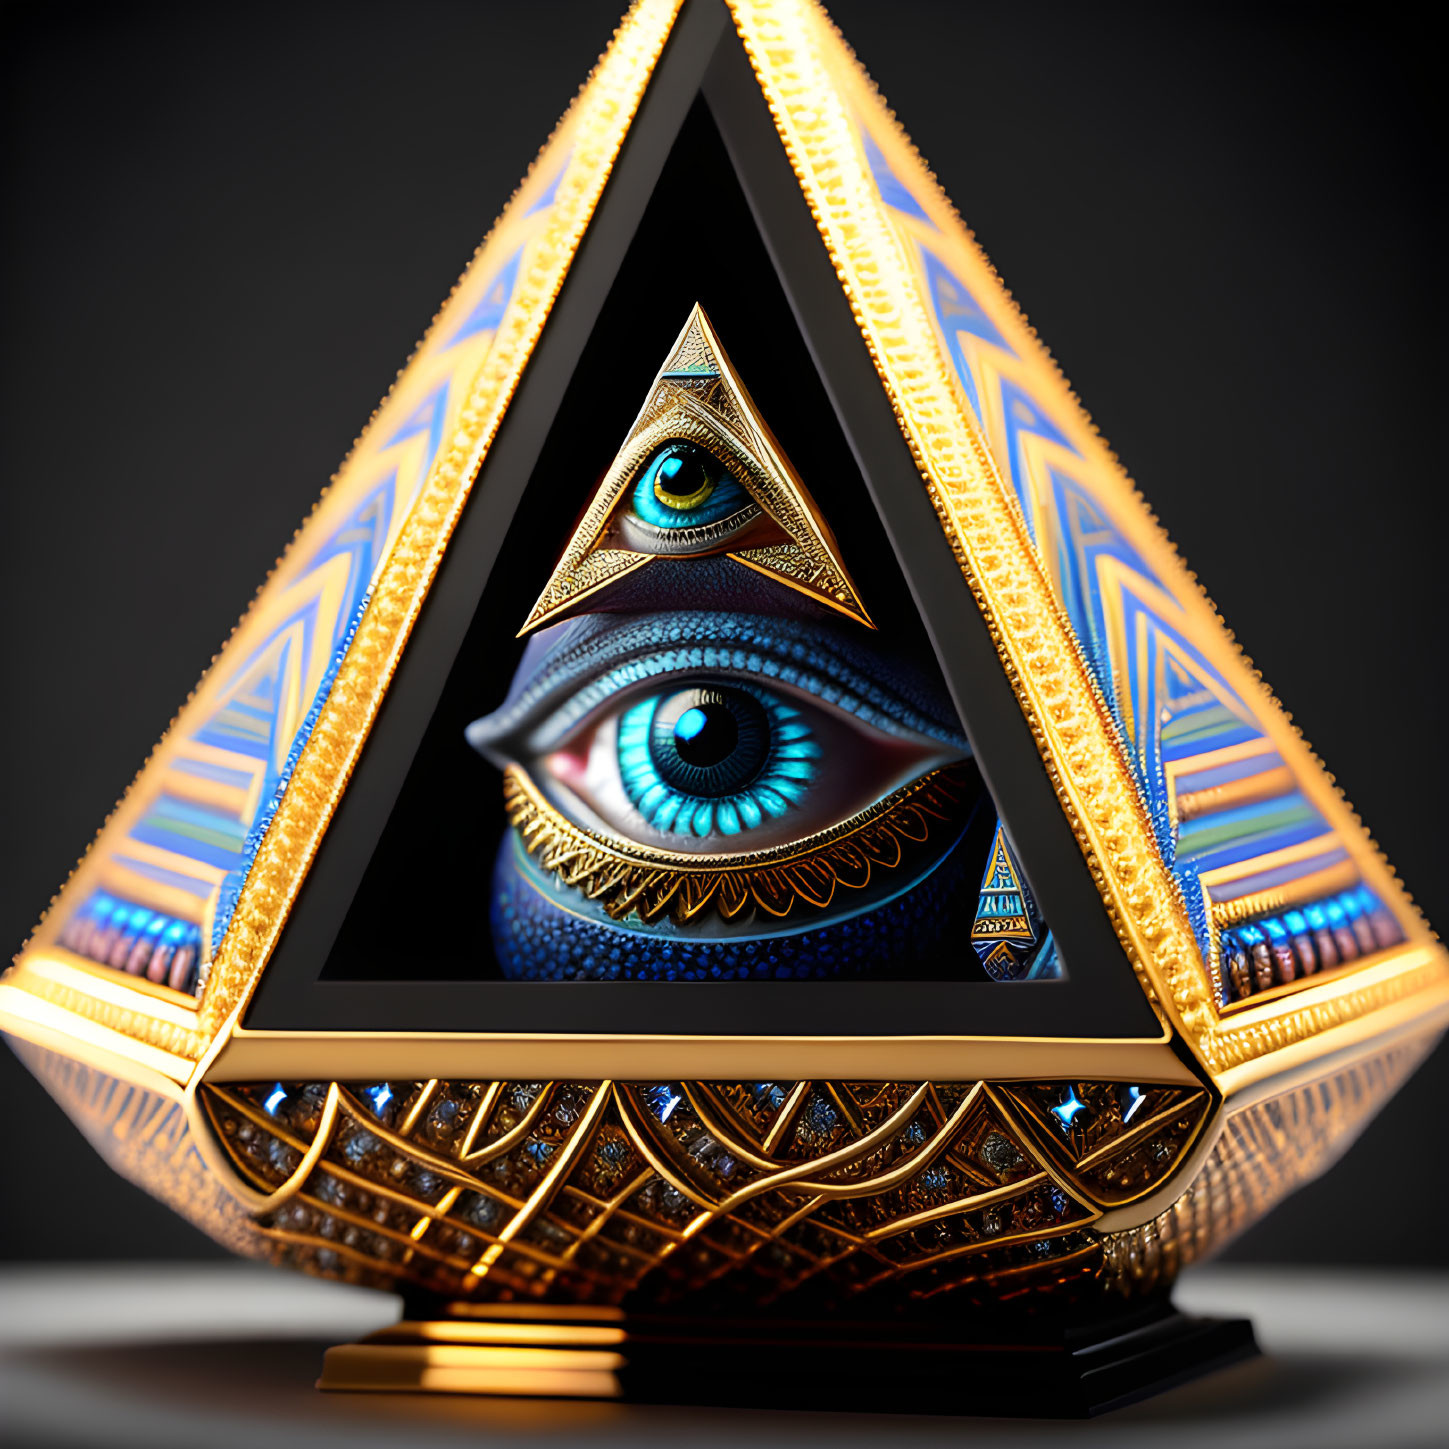 Surreal eye design in ornate triangular frame with intricate details